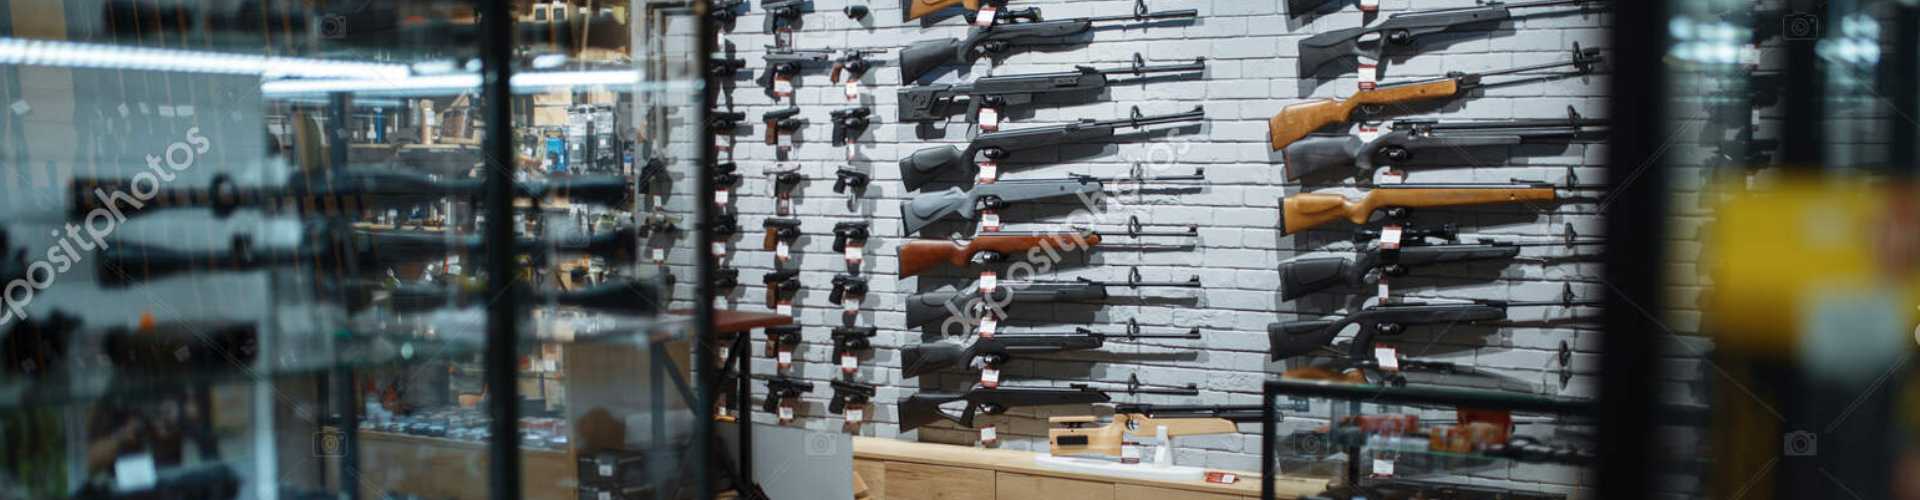 Discover our range of firearms available in Oakland Park.